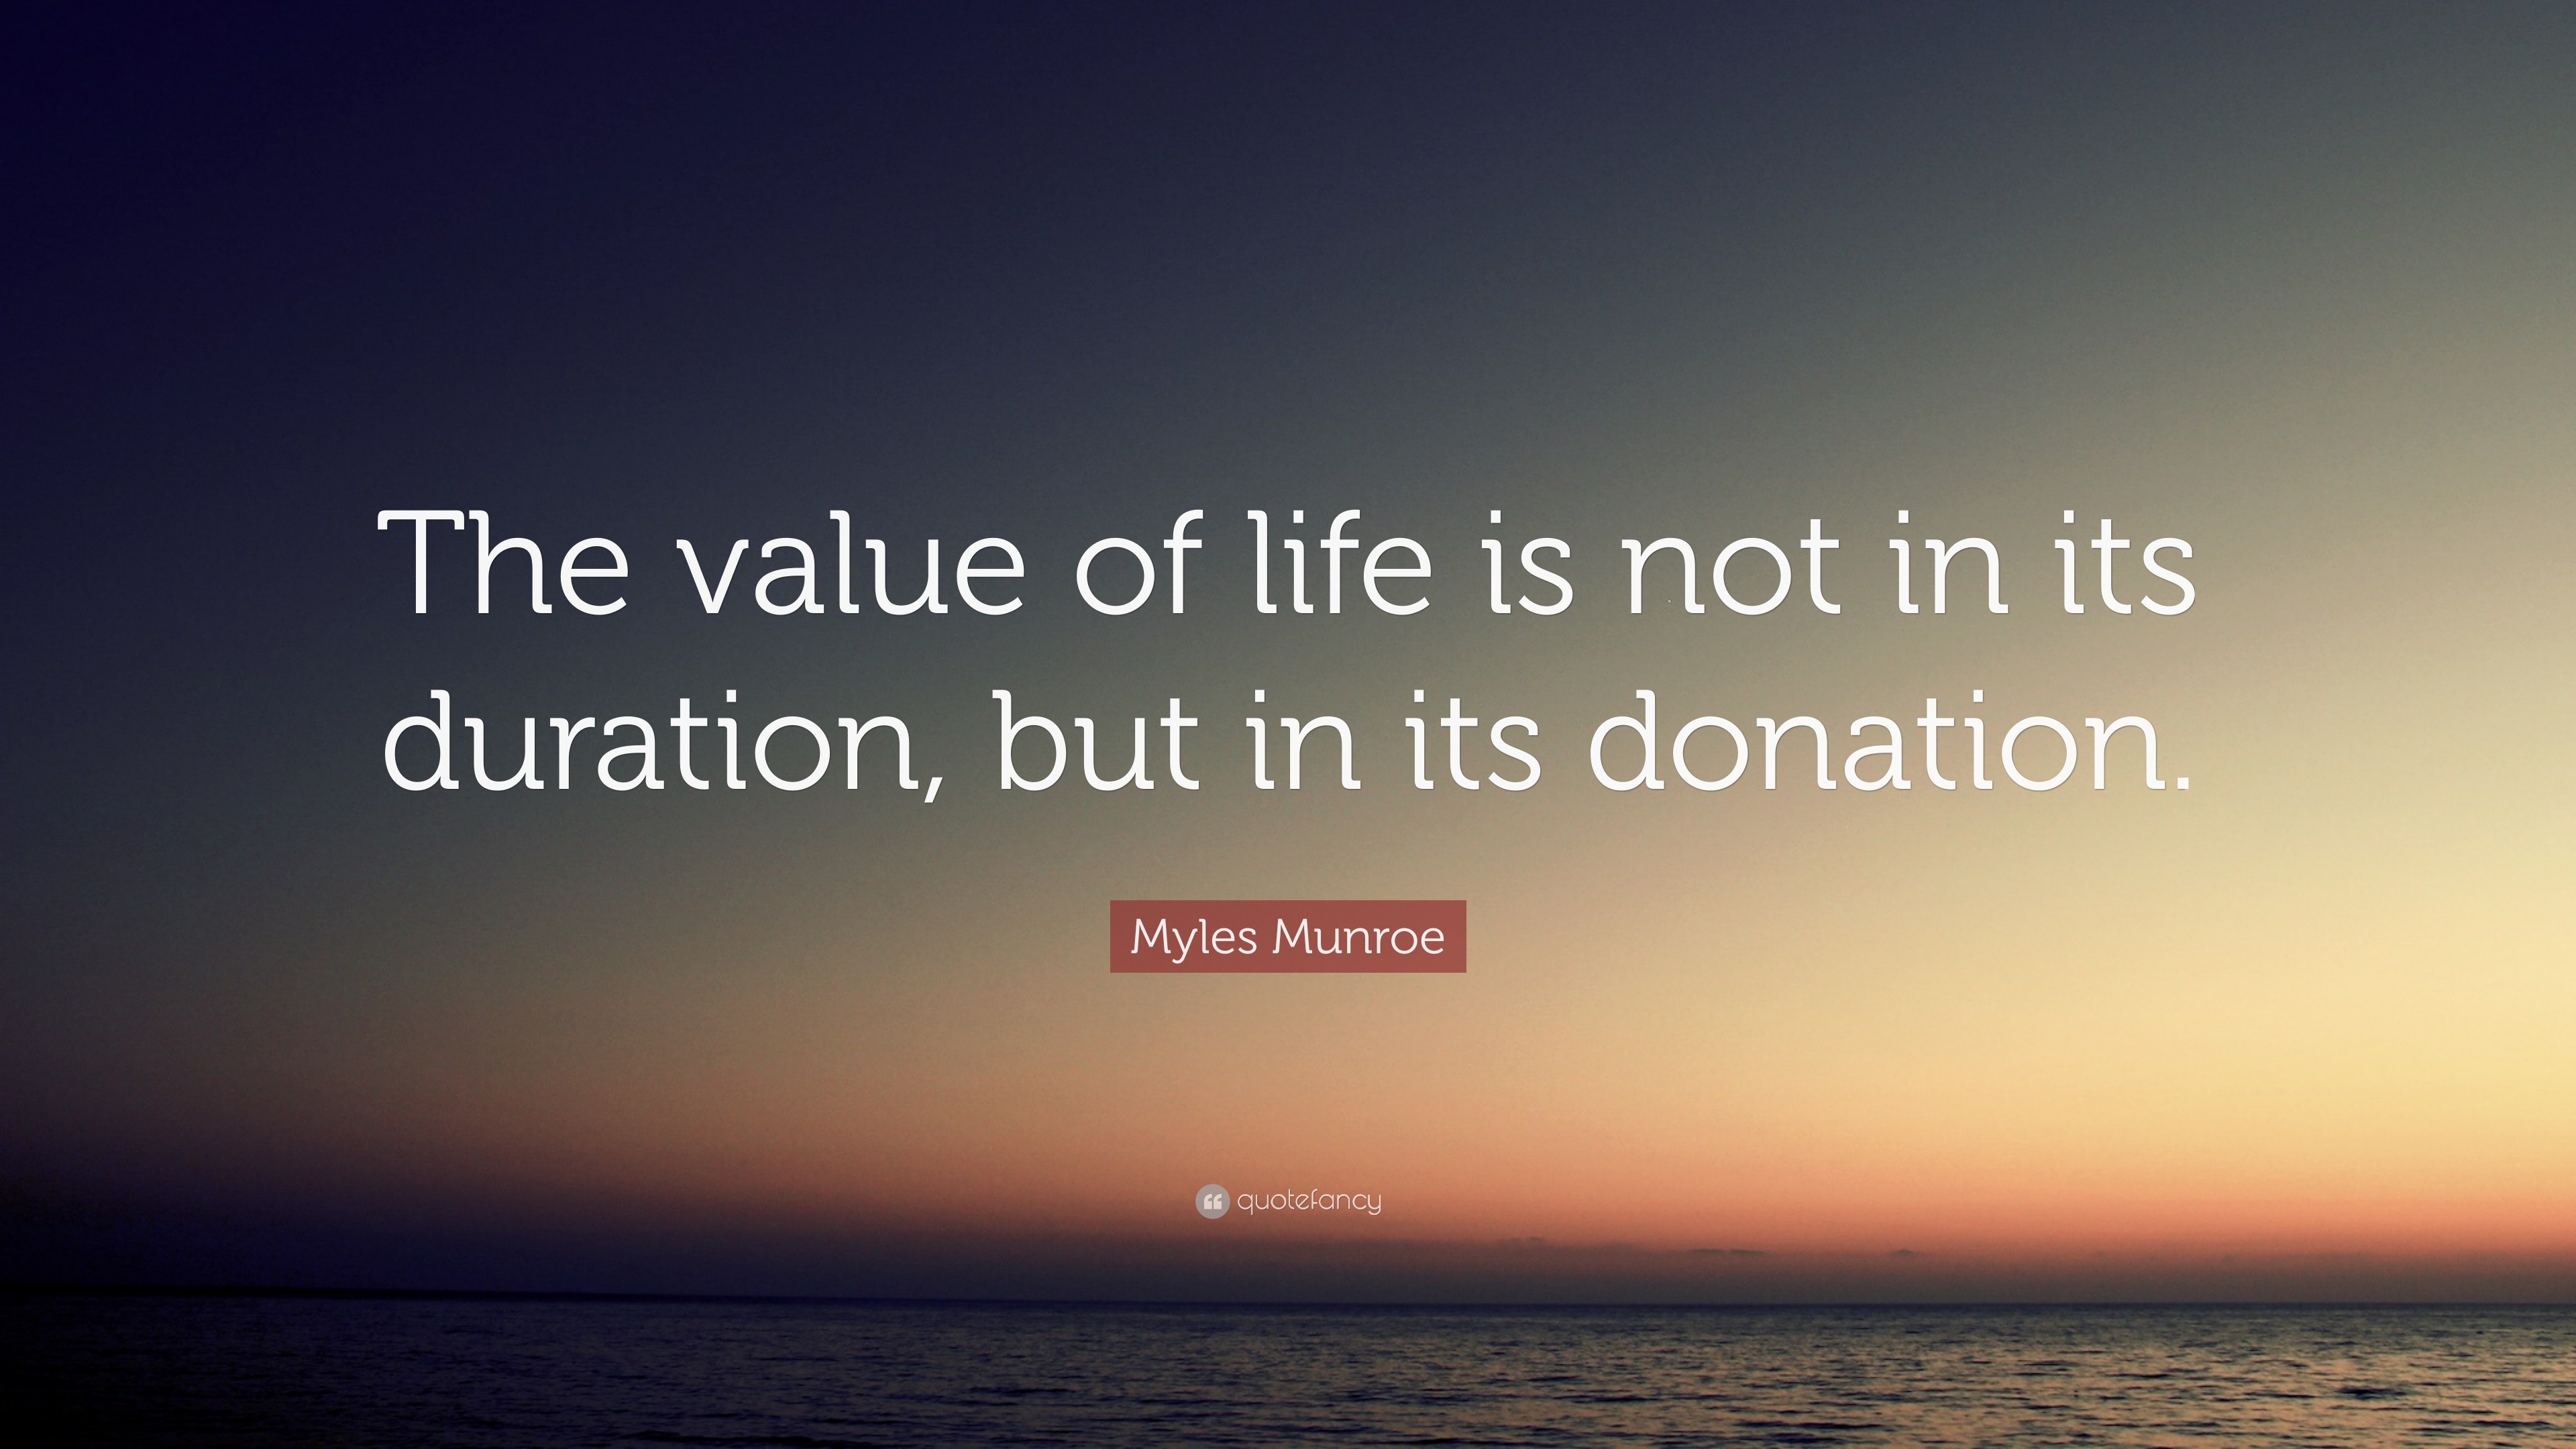 Myles Munroe Quote: “The value of life is not in its duration, but in